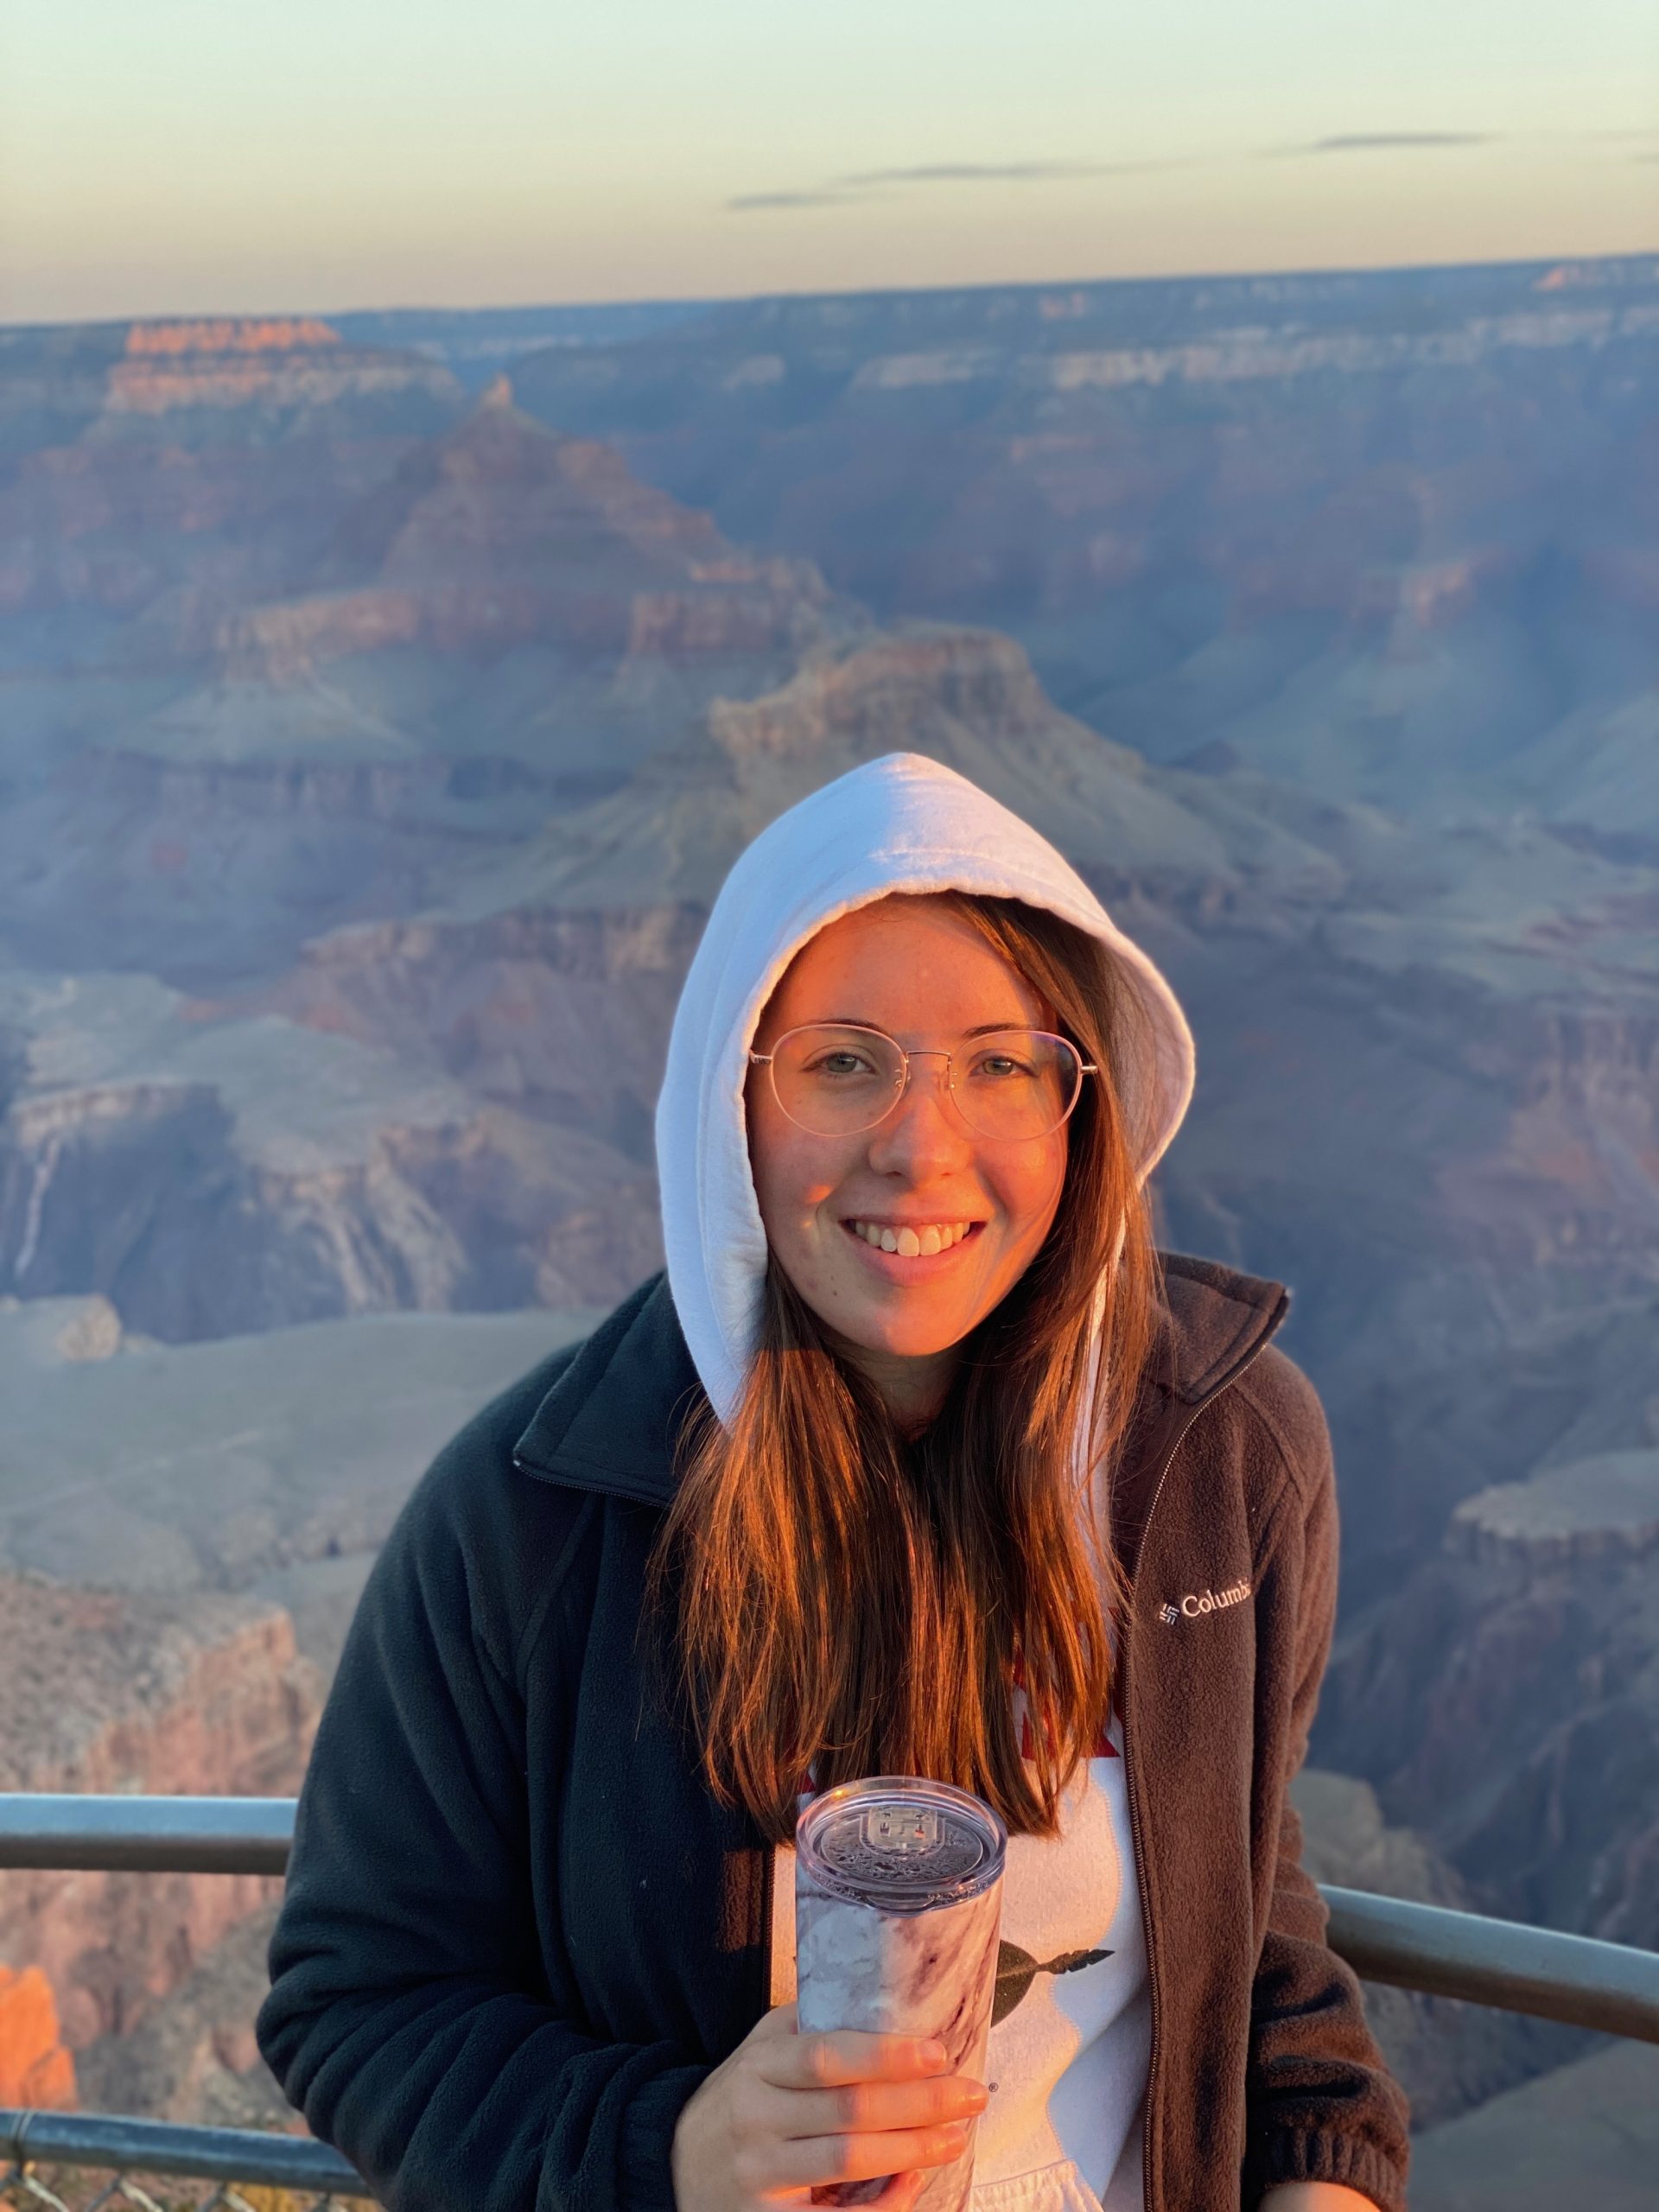 Caitlin O'Keefe wearing a white hood and glasses holding a cup in front of the Grand Canyon